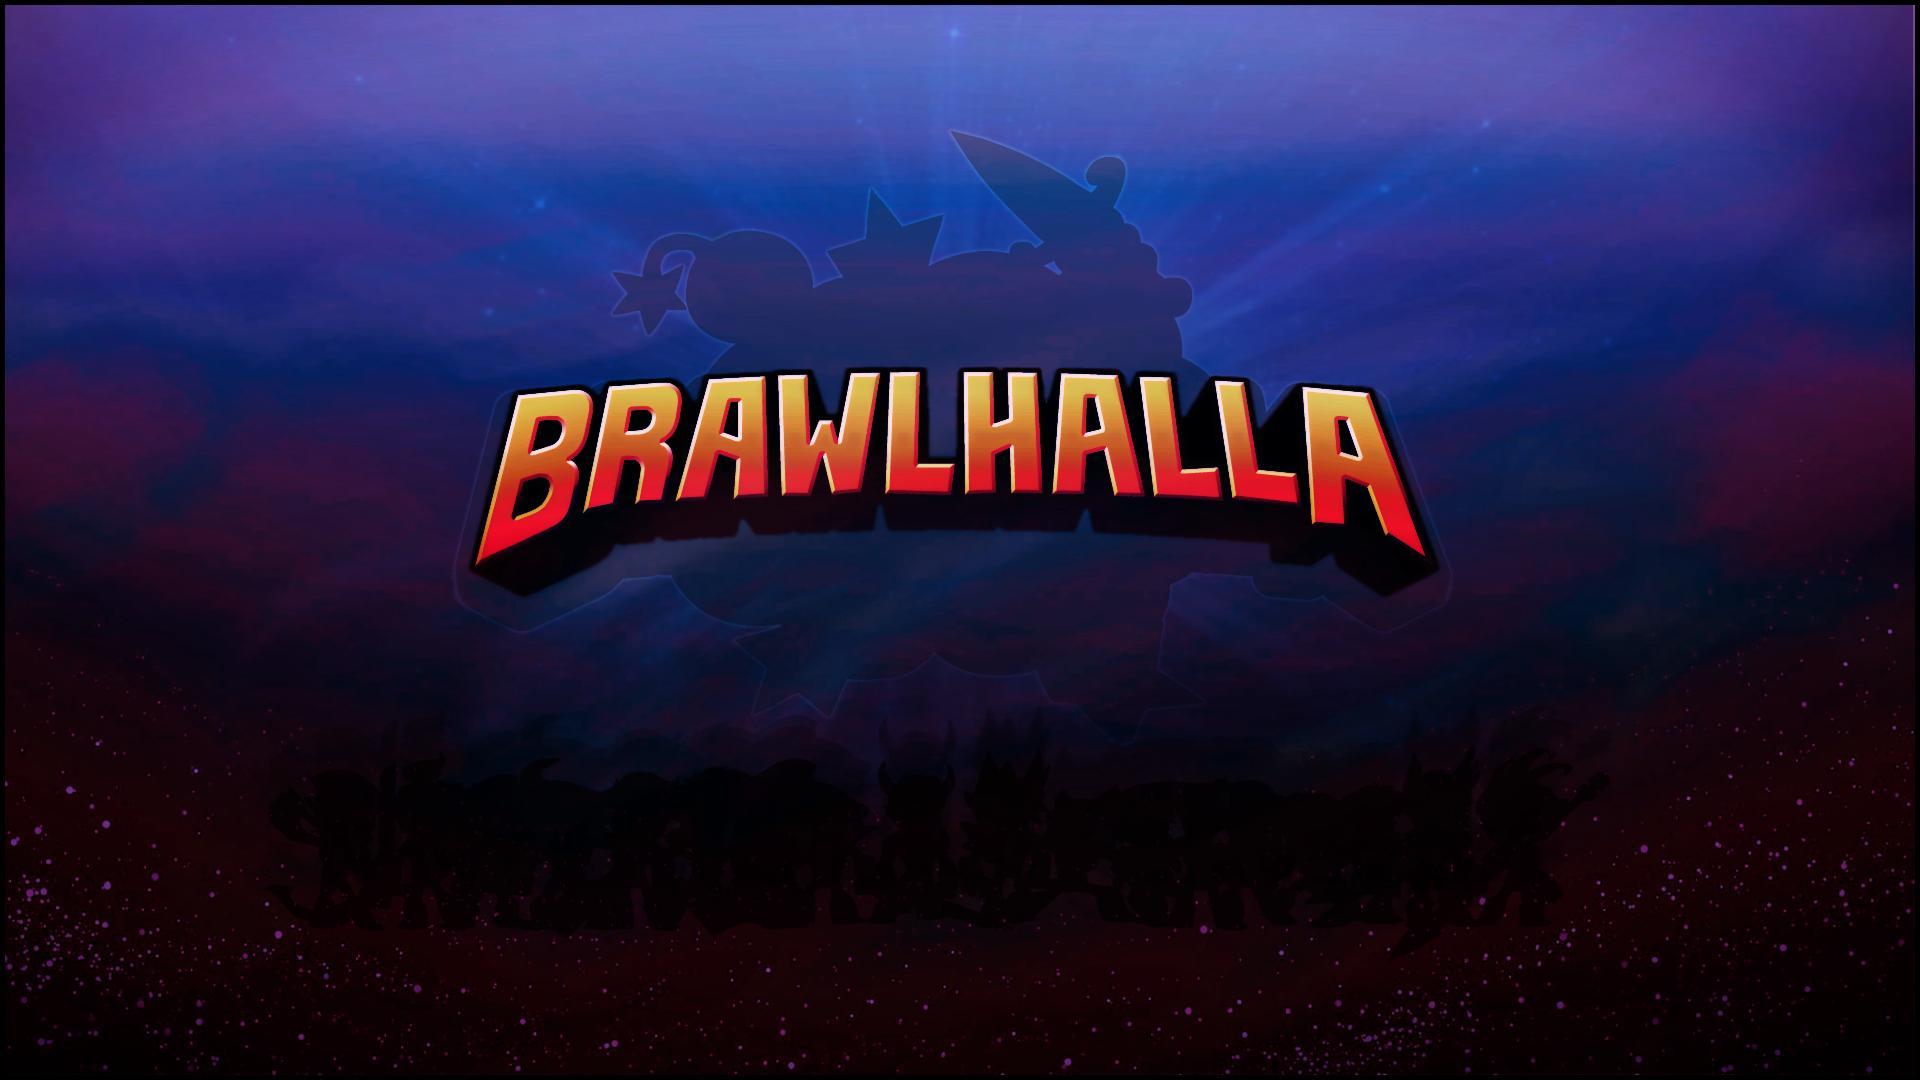 Discuss Everything About Brawlhalla